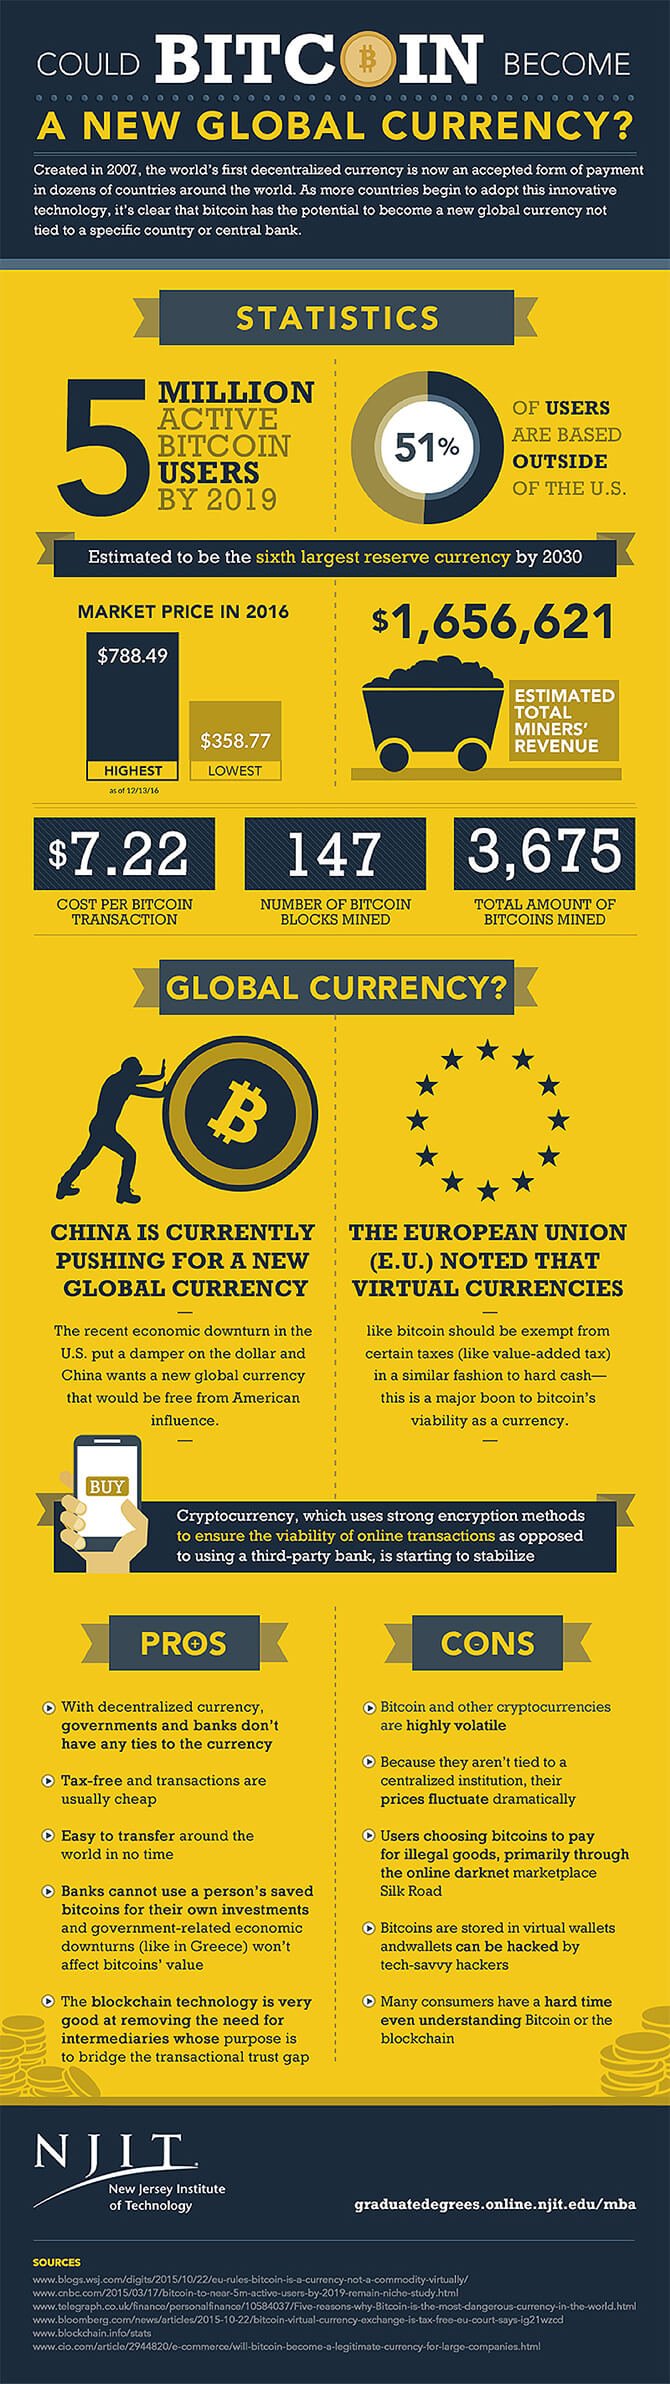 Could Bitcoin Become a New Global Currency? [Infogrpahic]